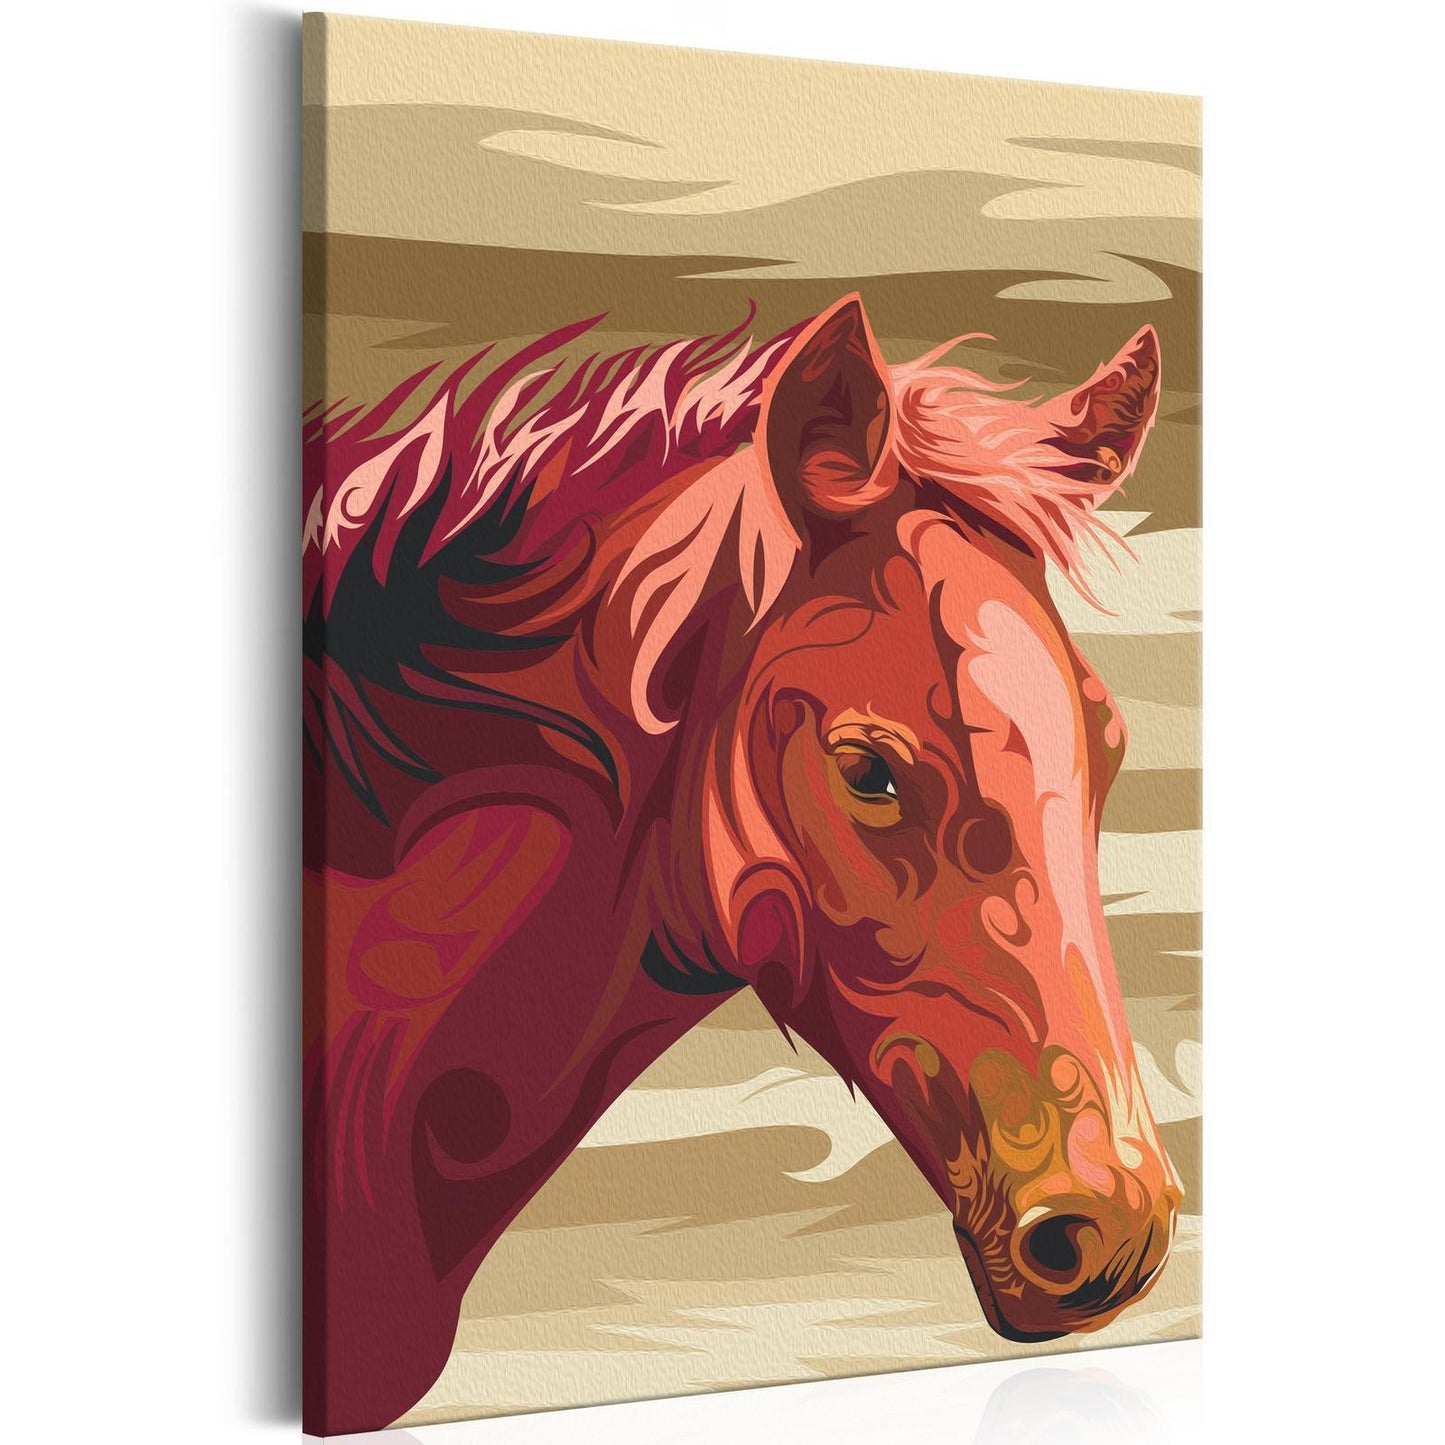 DIY Canvas Painting - Brown Horse 